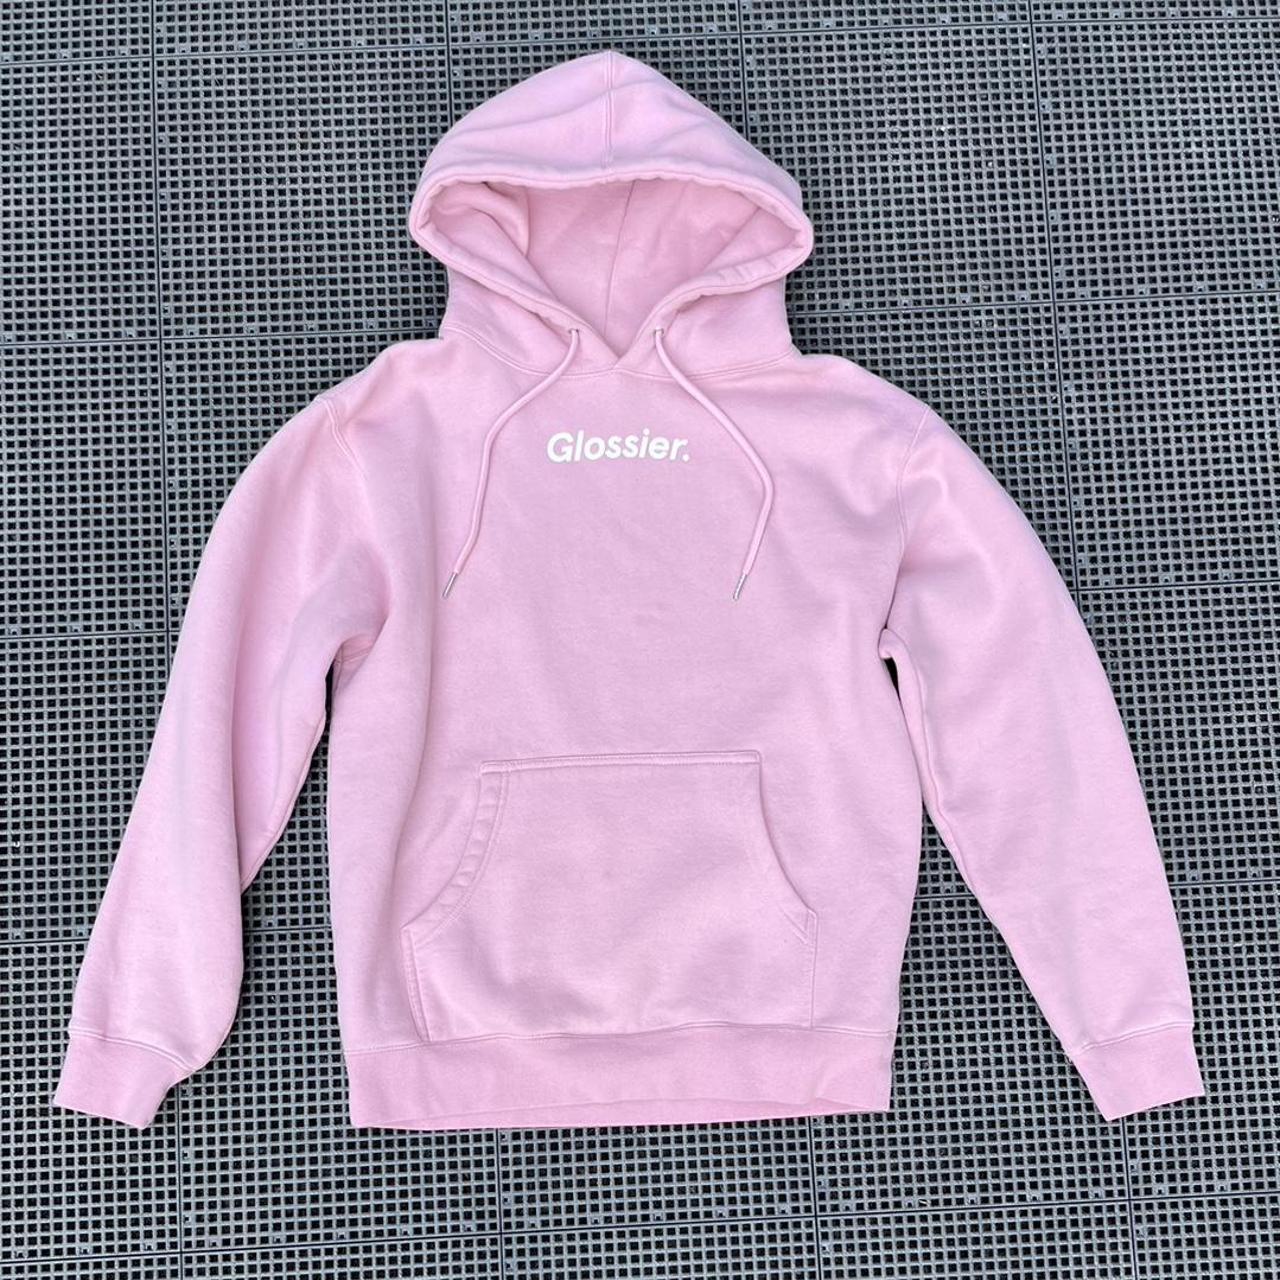 Glossier Hoodie There’s slight discoloration on... - Depop